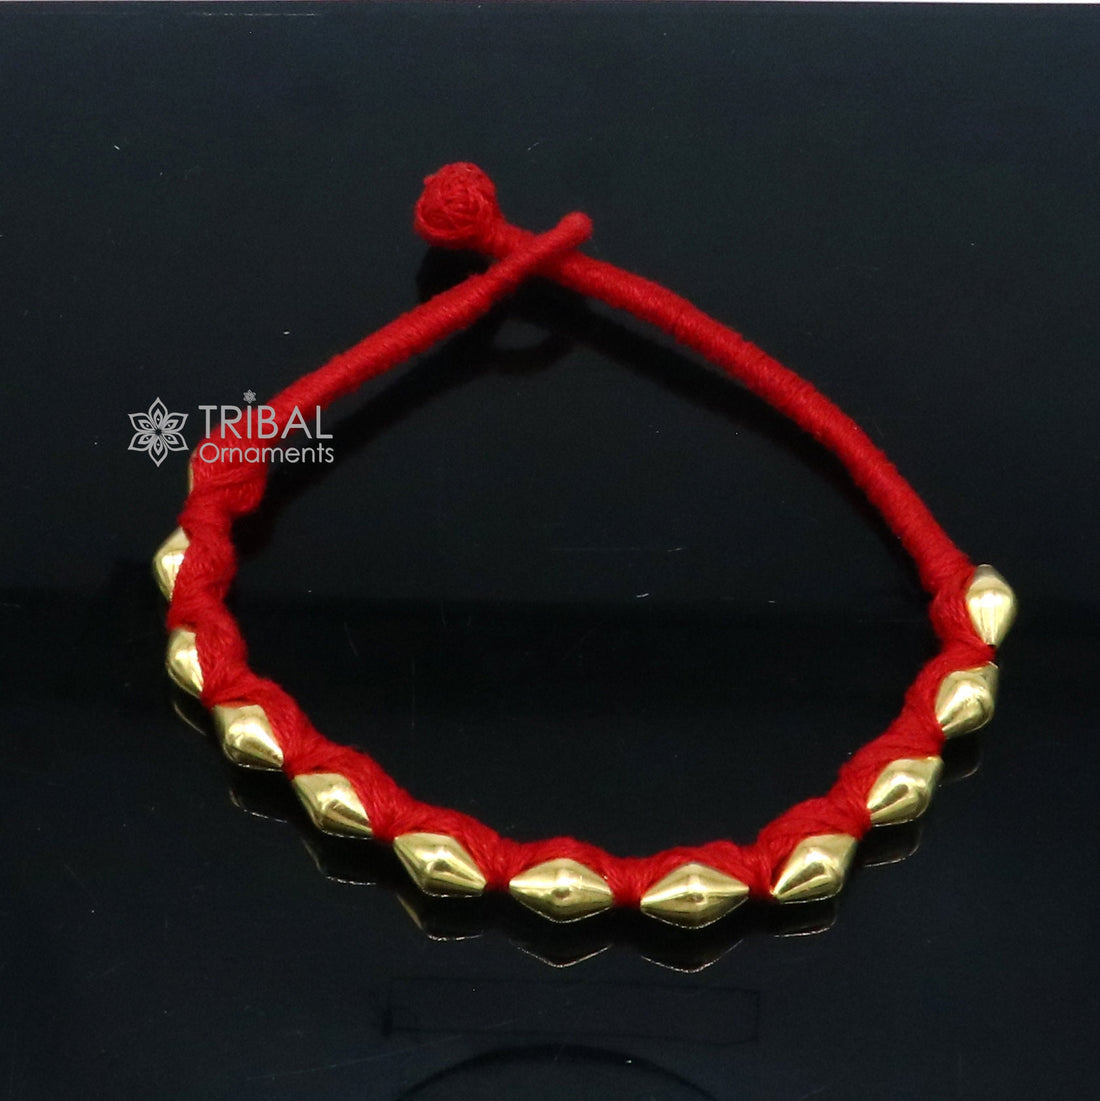 22kt yellow gold handmade Dholki beads oval shape beads customized threads anklet or bracelet best cultural ethnic tribal jewelry gbr81 - TRIBAL ORNAMENTS